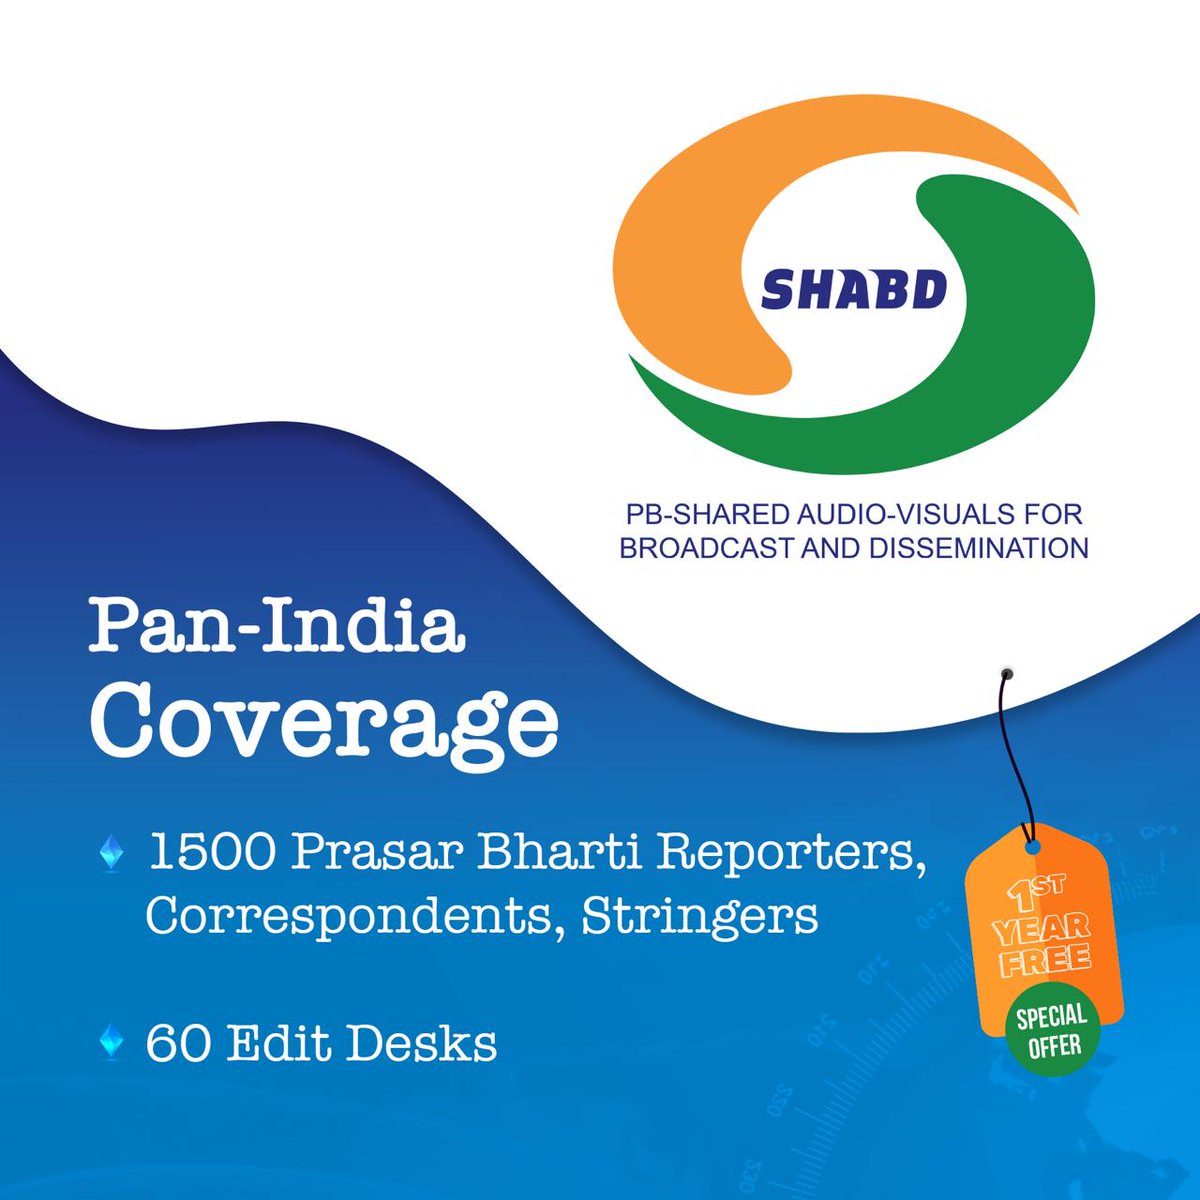 Everyone keeps asking us what is #PBSHABD, so we made an explainer.
Media organizations can sign up on shabd.prasarbharati.org to access the wide array of services available only on #PBSHABD.